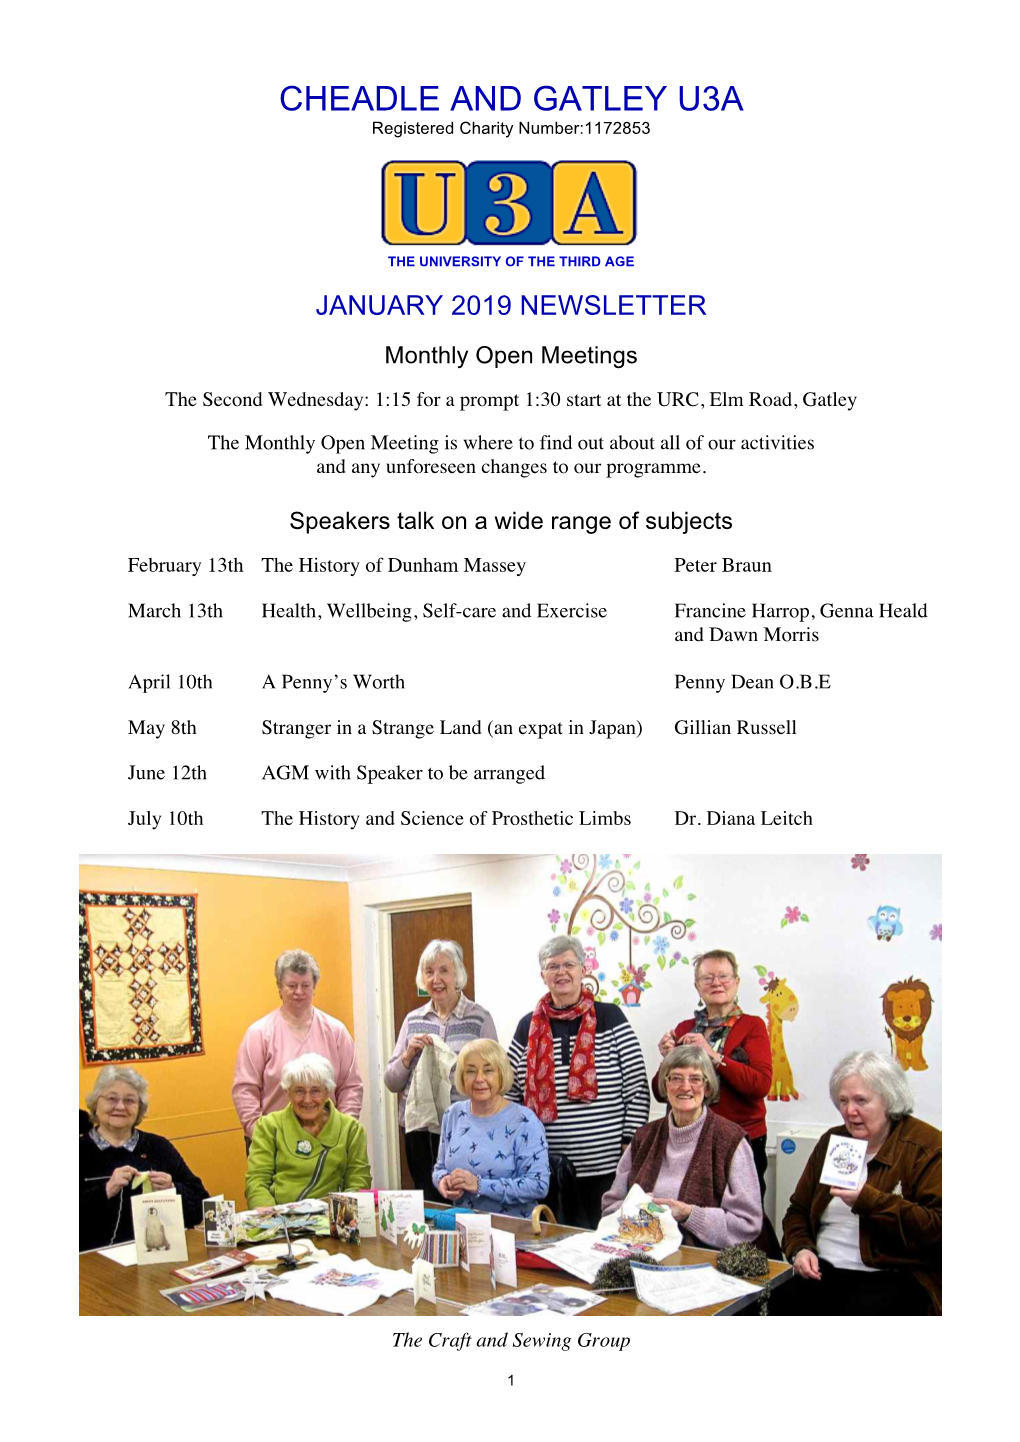 CHEADLE and GATLEY U3A Registered Charity Number:1172853